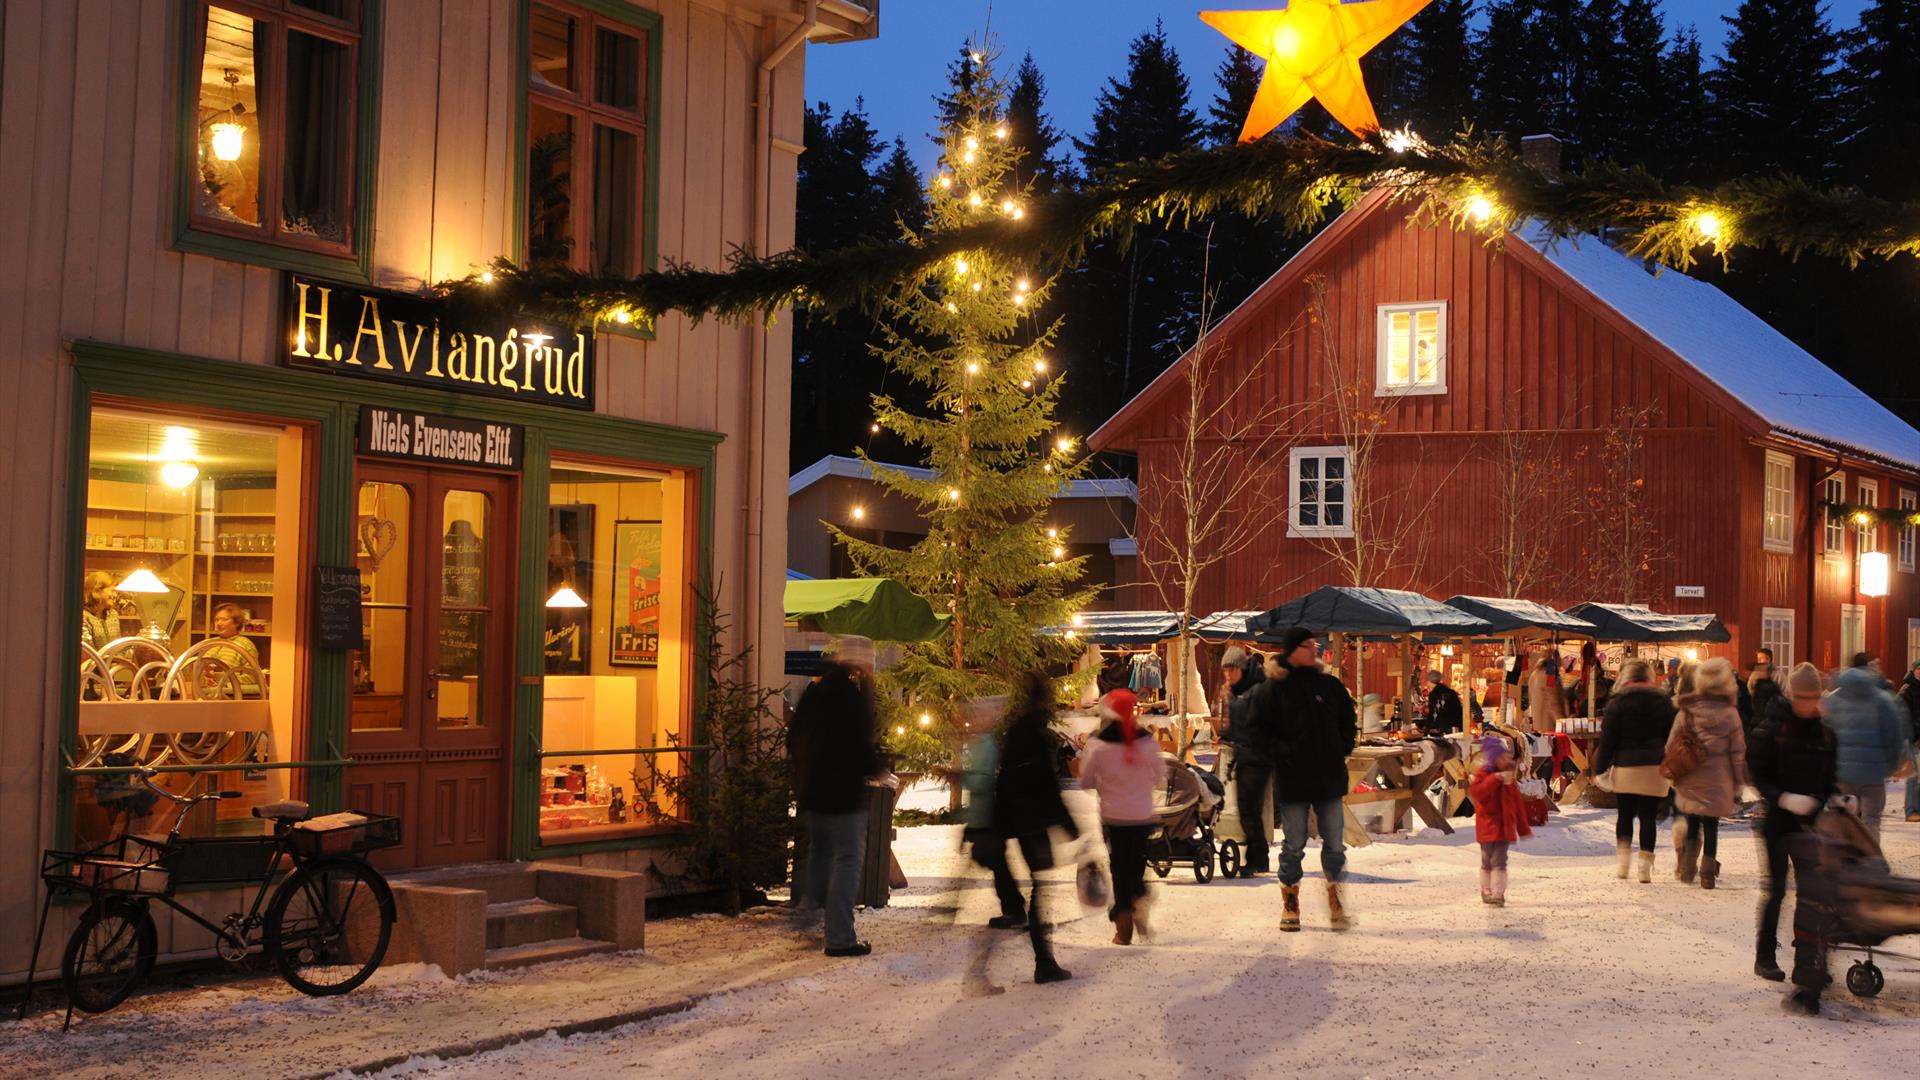 The square at Maihaugen with Christmas tree and decorated street.